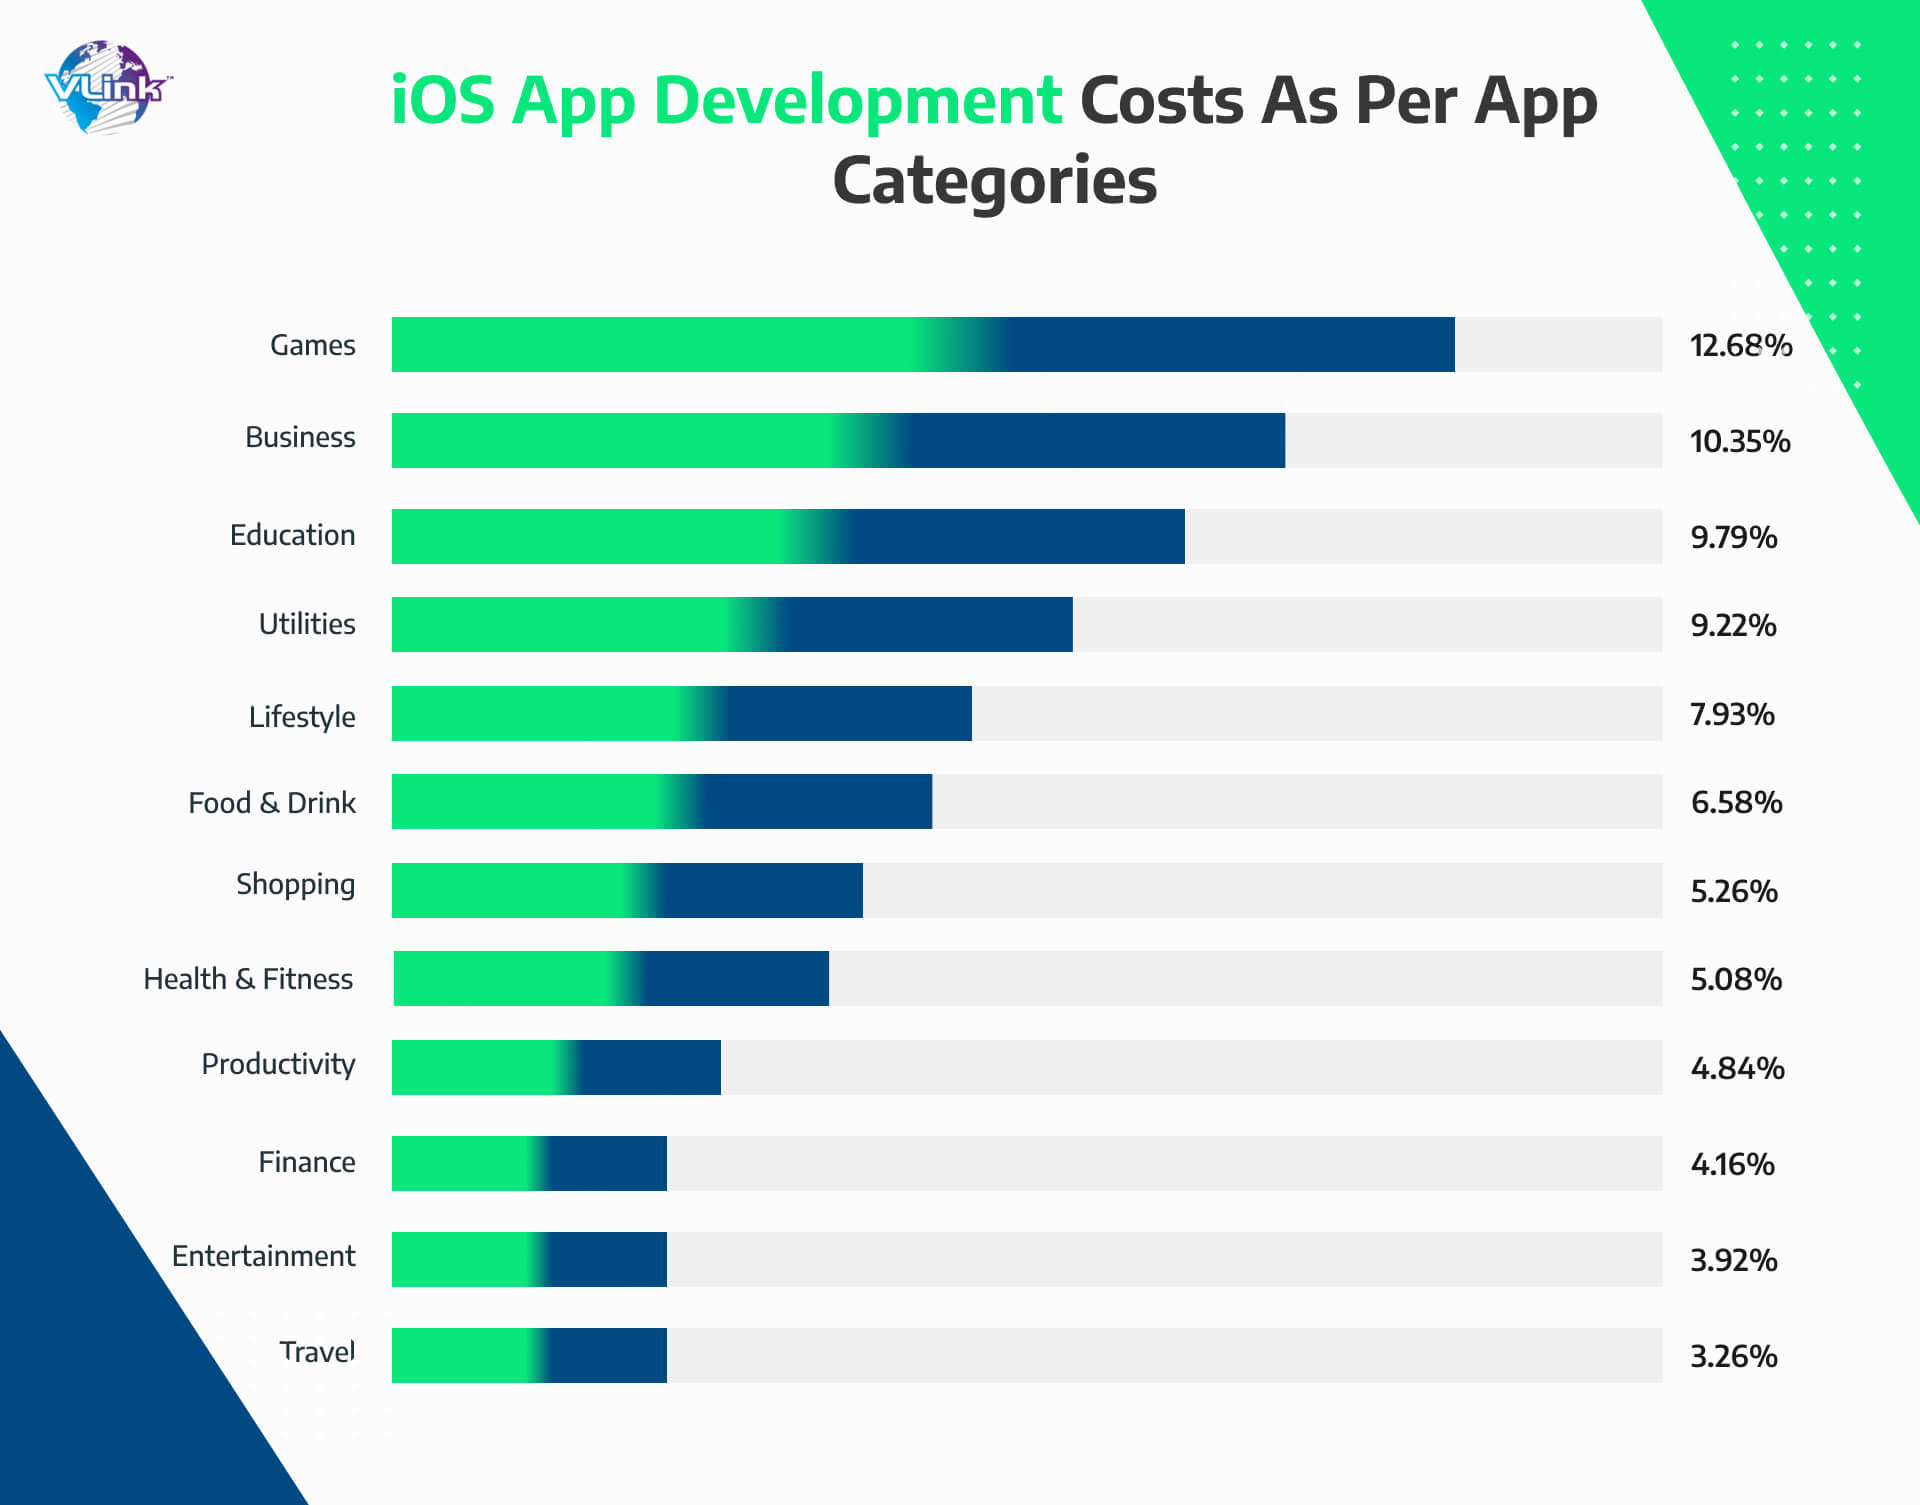 Cost breakdown to build an iOS app based on its category